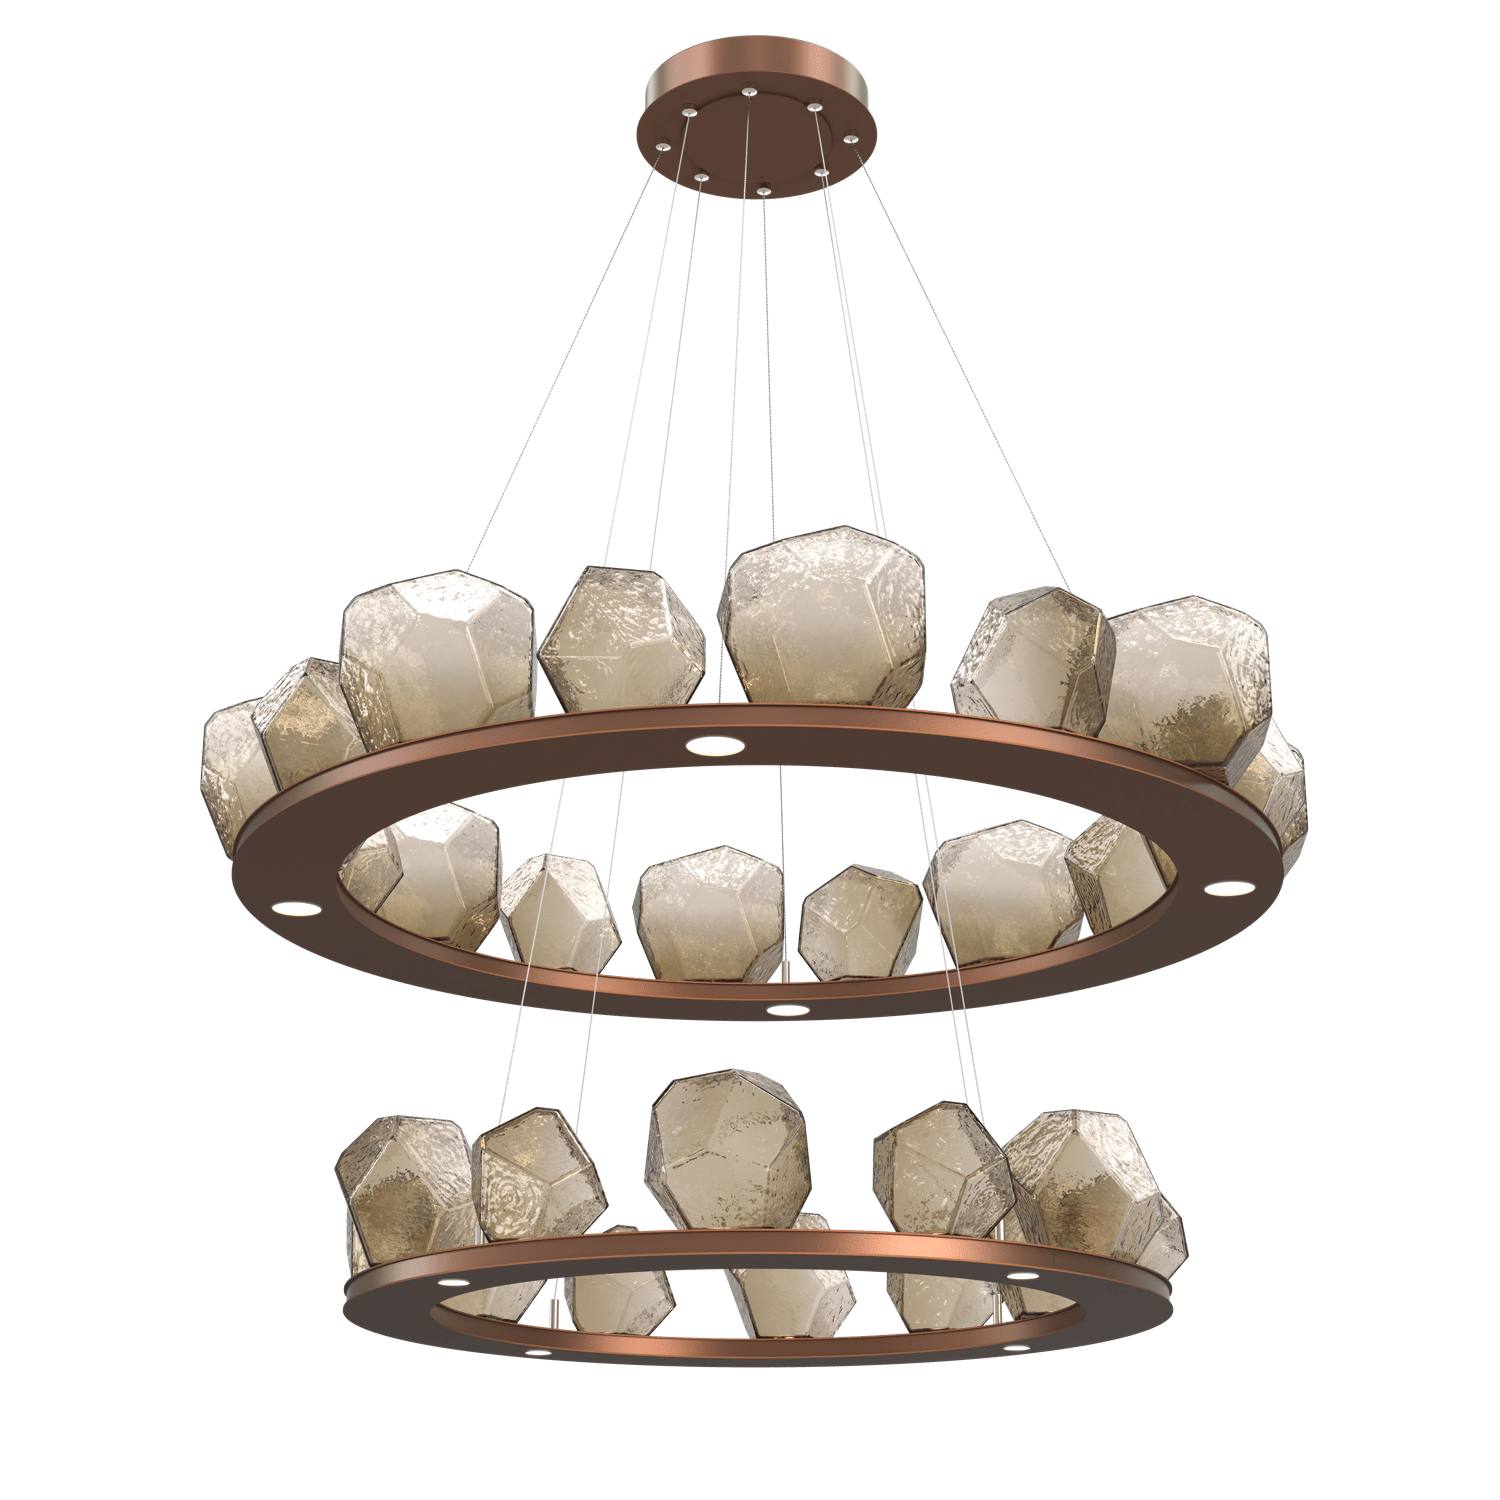 CHB0039-2B-BB-B-Hammerton-Studio-Gem-48-inch-two-tier-ring-chandelier-with-burnished-bronze-finish-and-bronze-blown-glass-shades-and-LED-lamping